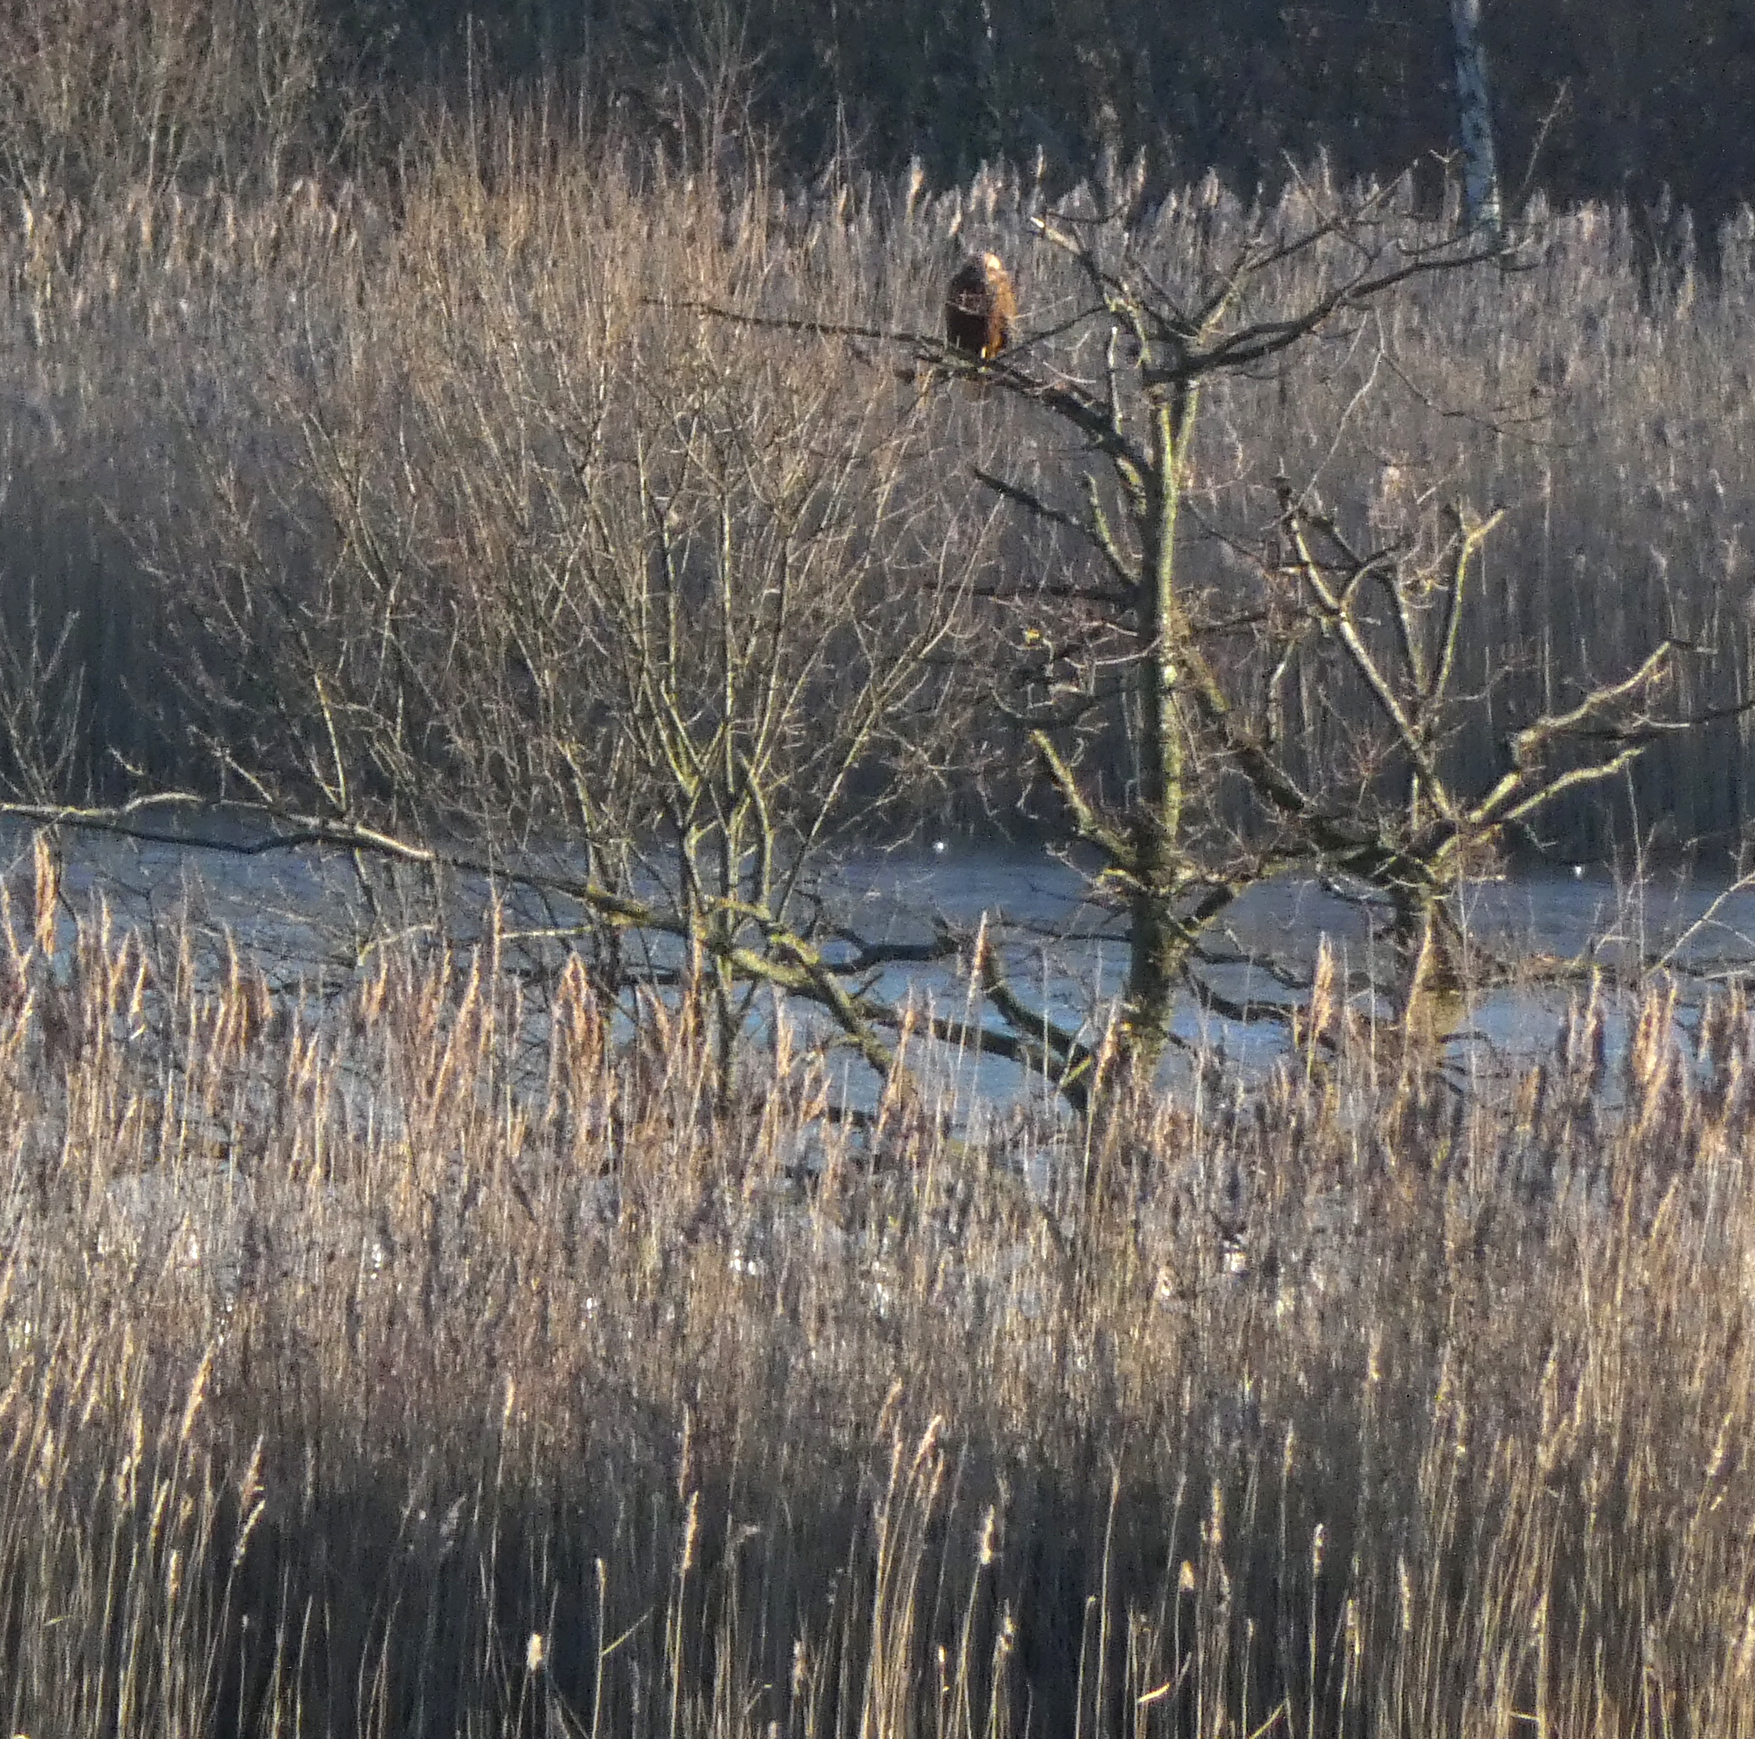 Marsh Harrier In A Tree, Potteric Carr, 17th January 2023